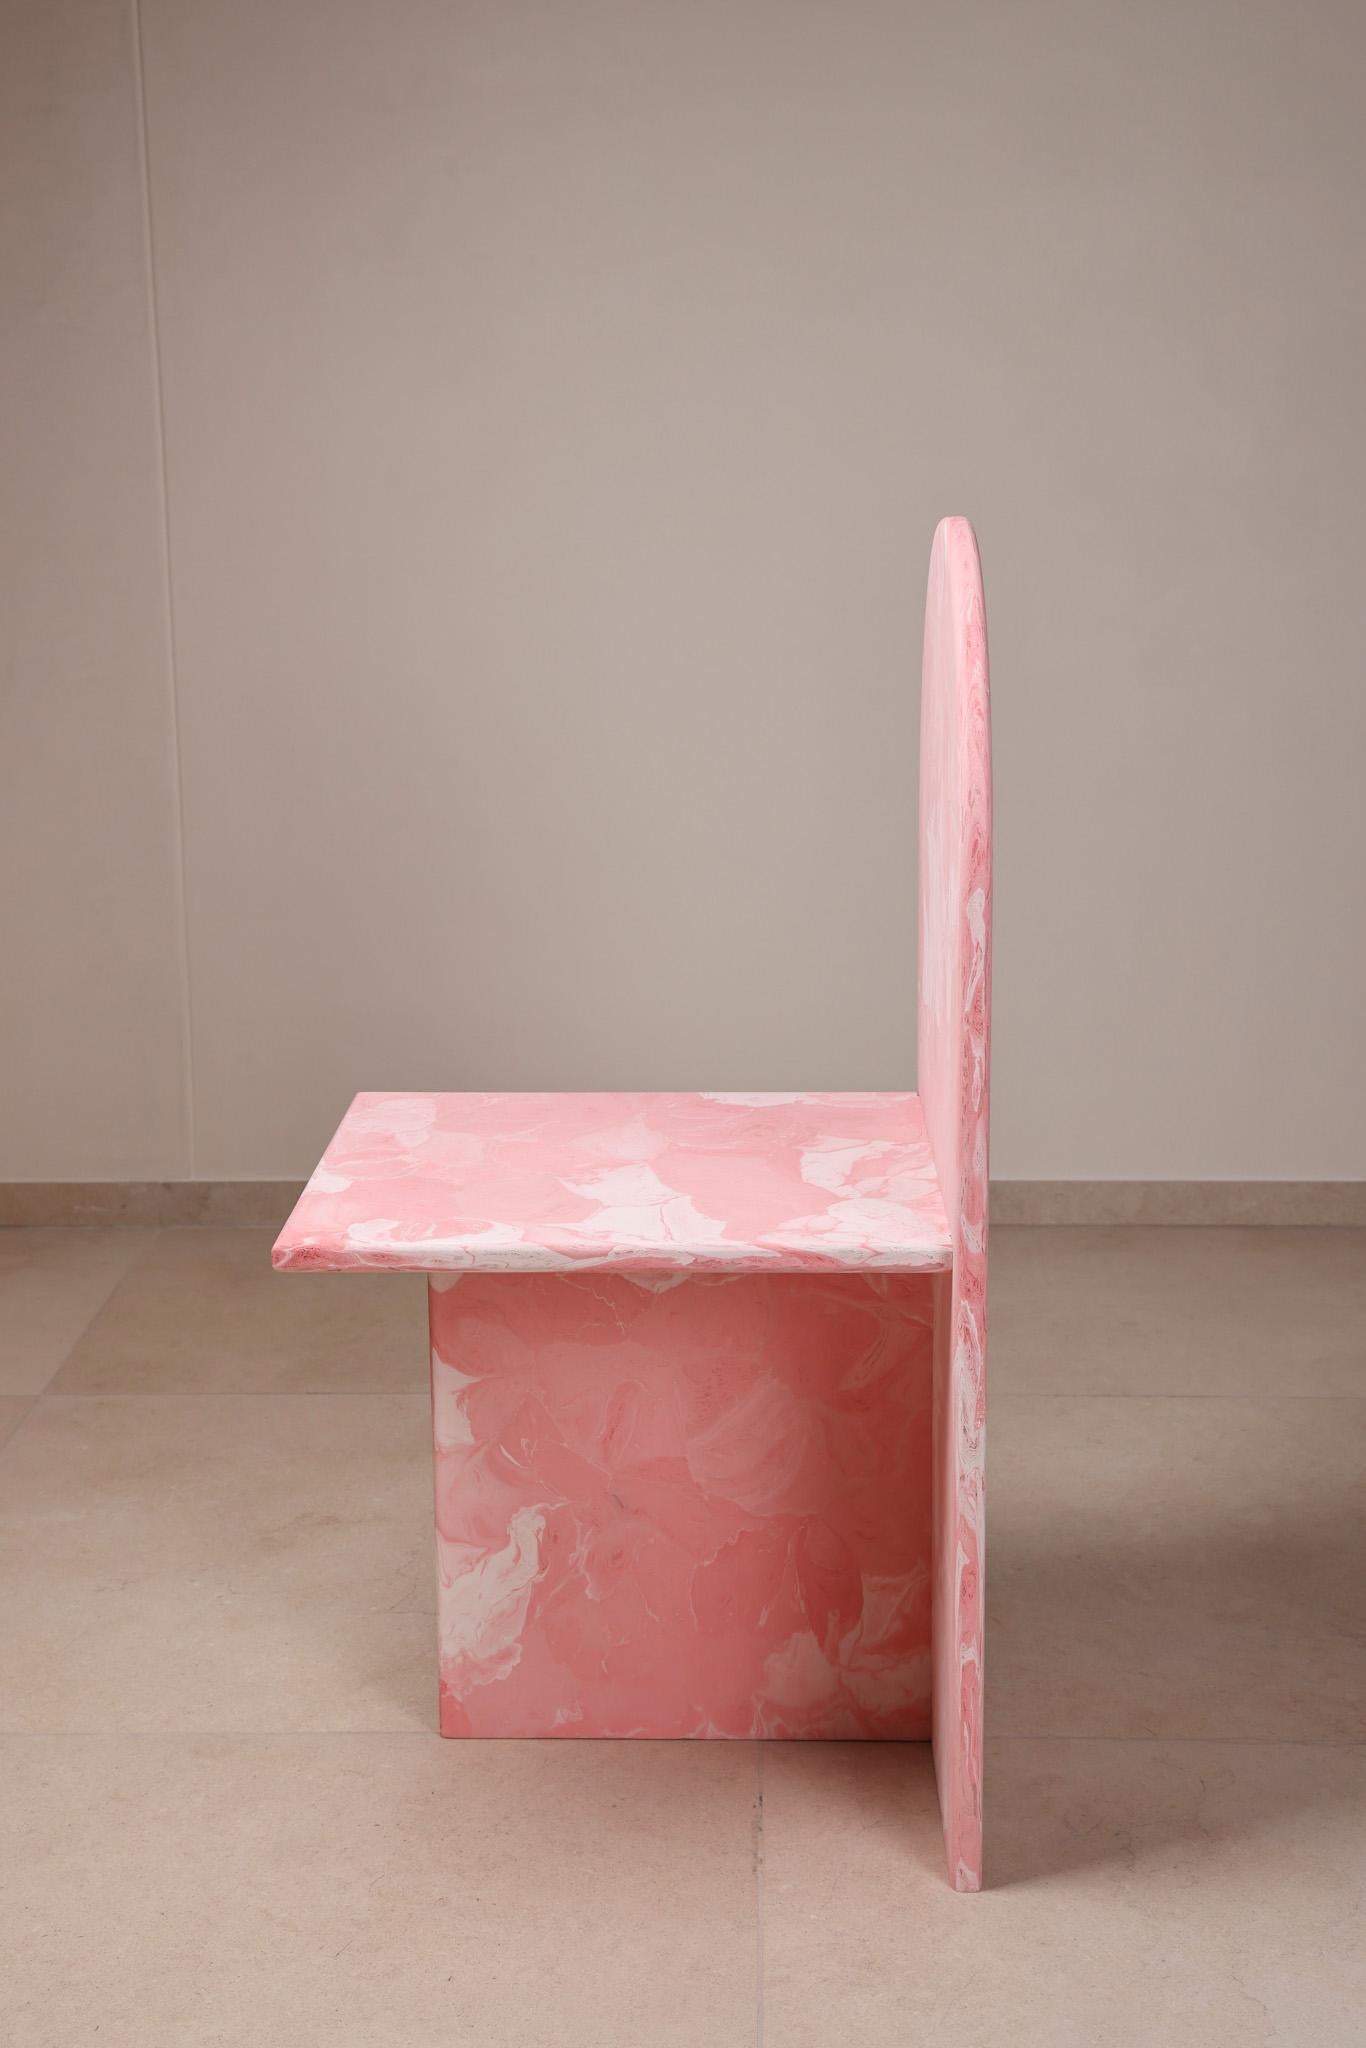 Contemporary Pink Chair Hand-Crafted from 100% Recycled Plastic by Anqa Studios.
Both pragmatically perfect in design and a unique style statement, the ANQA Moonrise Chair is made for fans of 80s trends, modern and geometric shapes. The ANQA